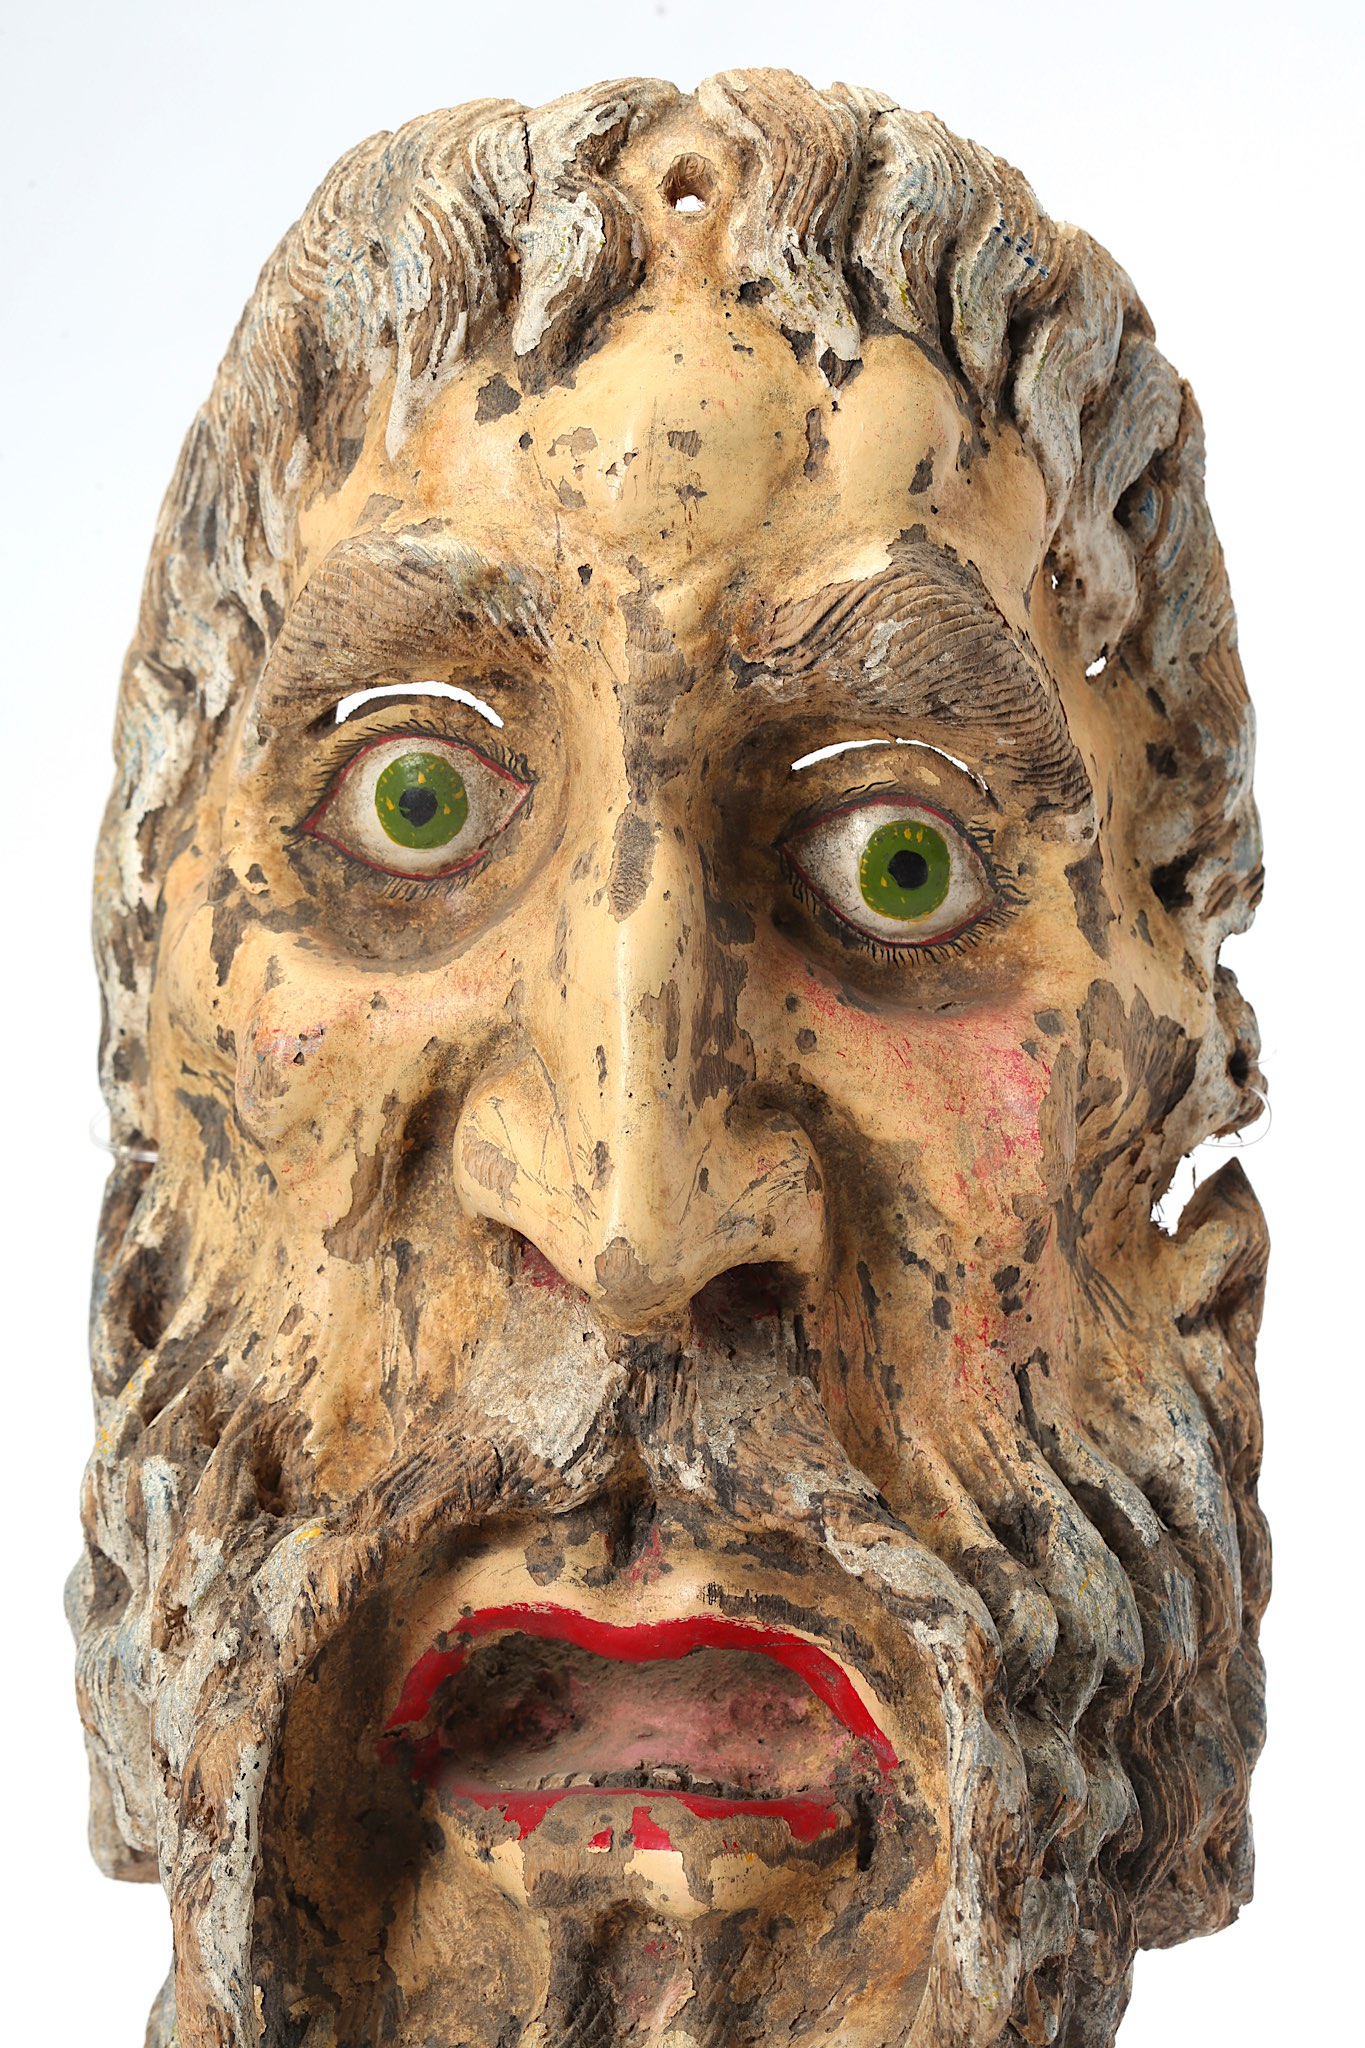 A MEXICAN PAINTED WOOD MASK  Carved in light wood, this mask has a highly expressive face with a - Image 2 of 4